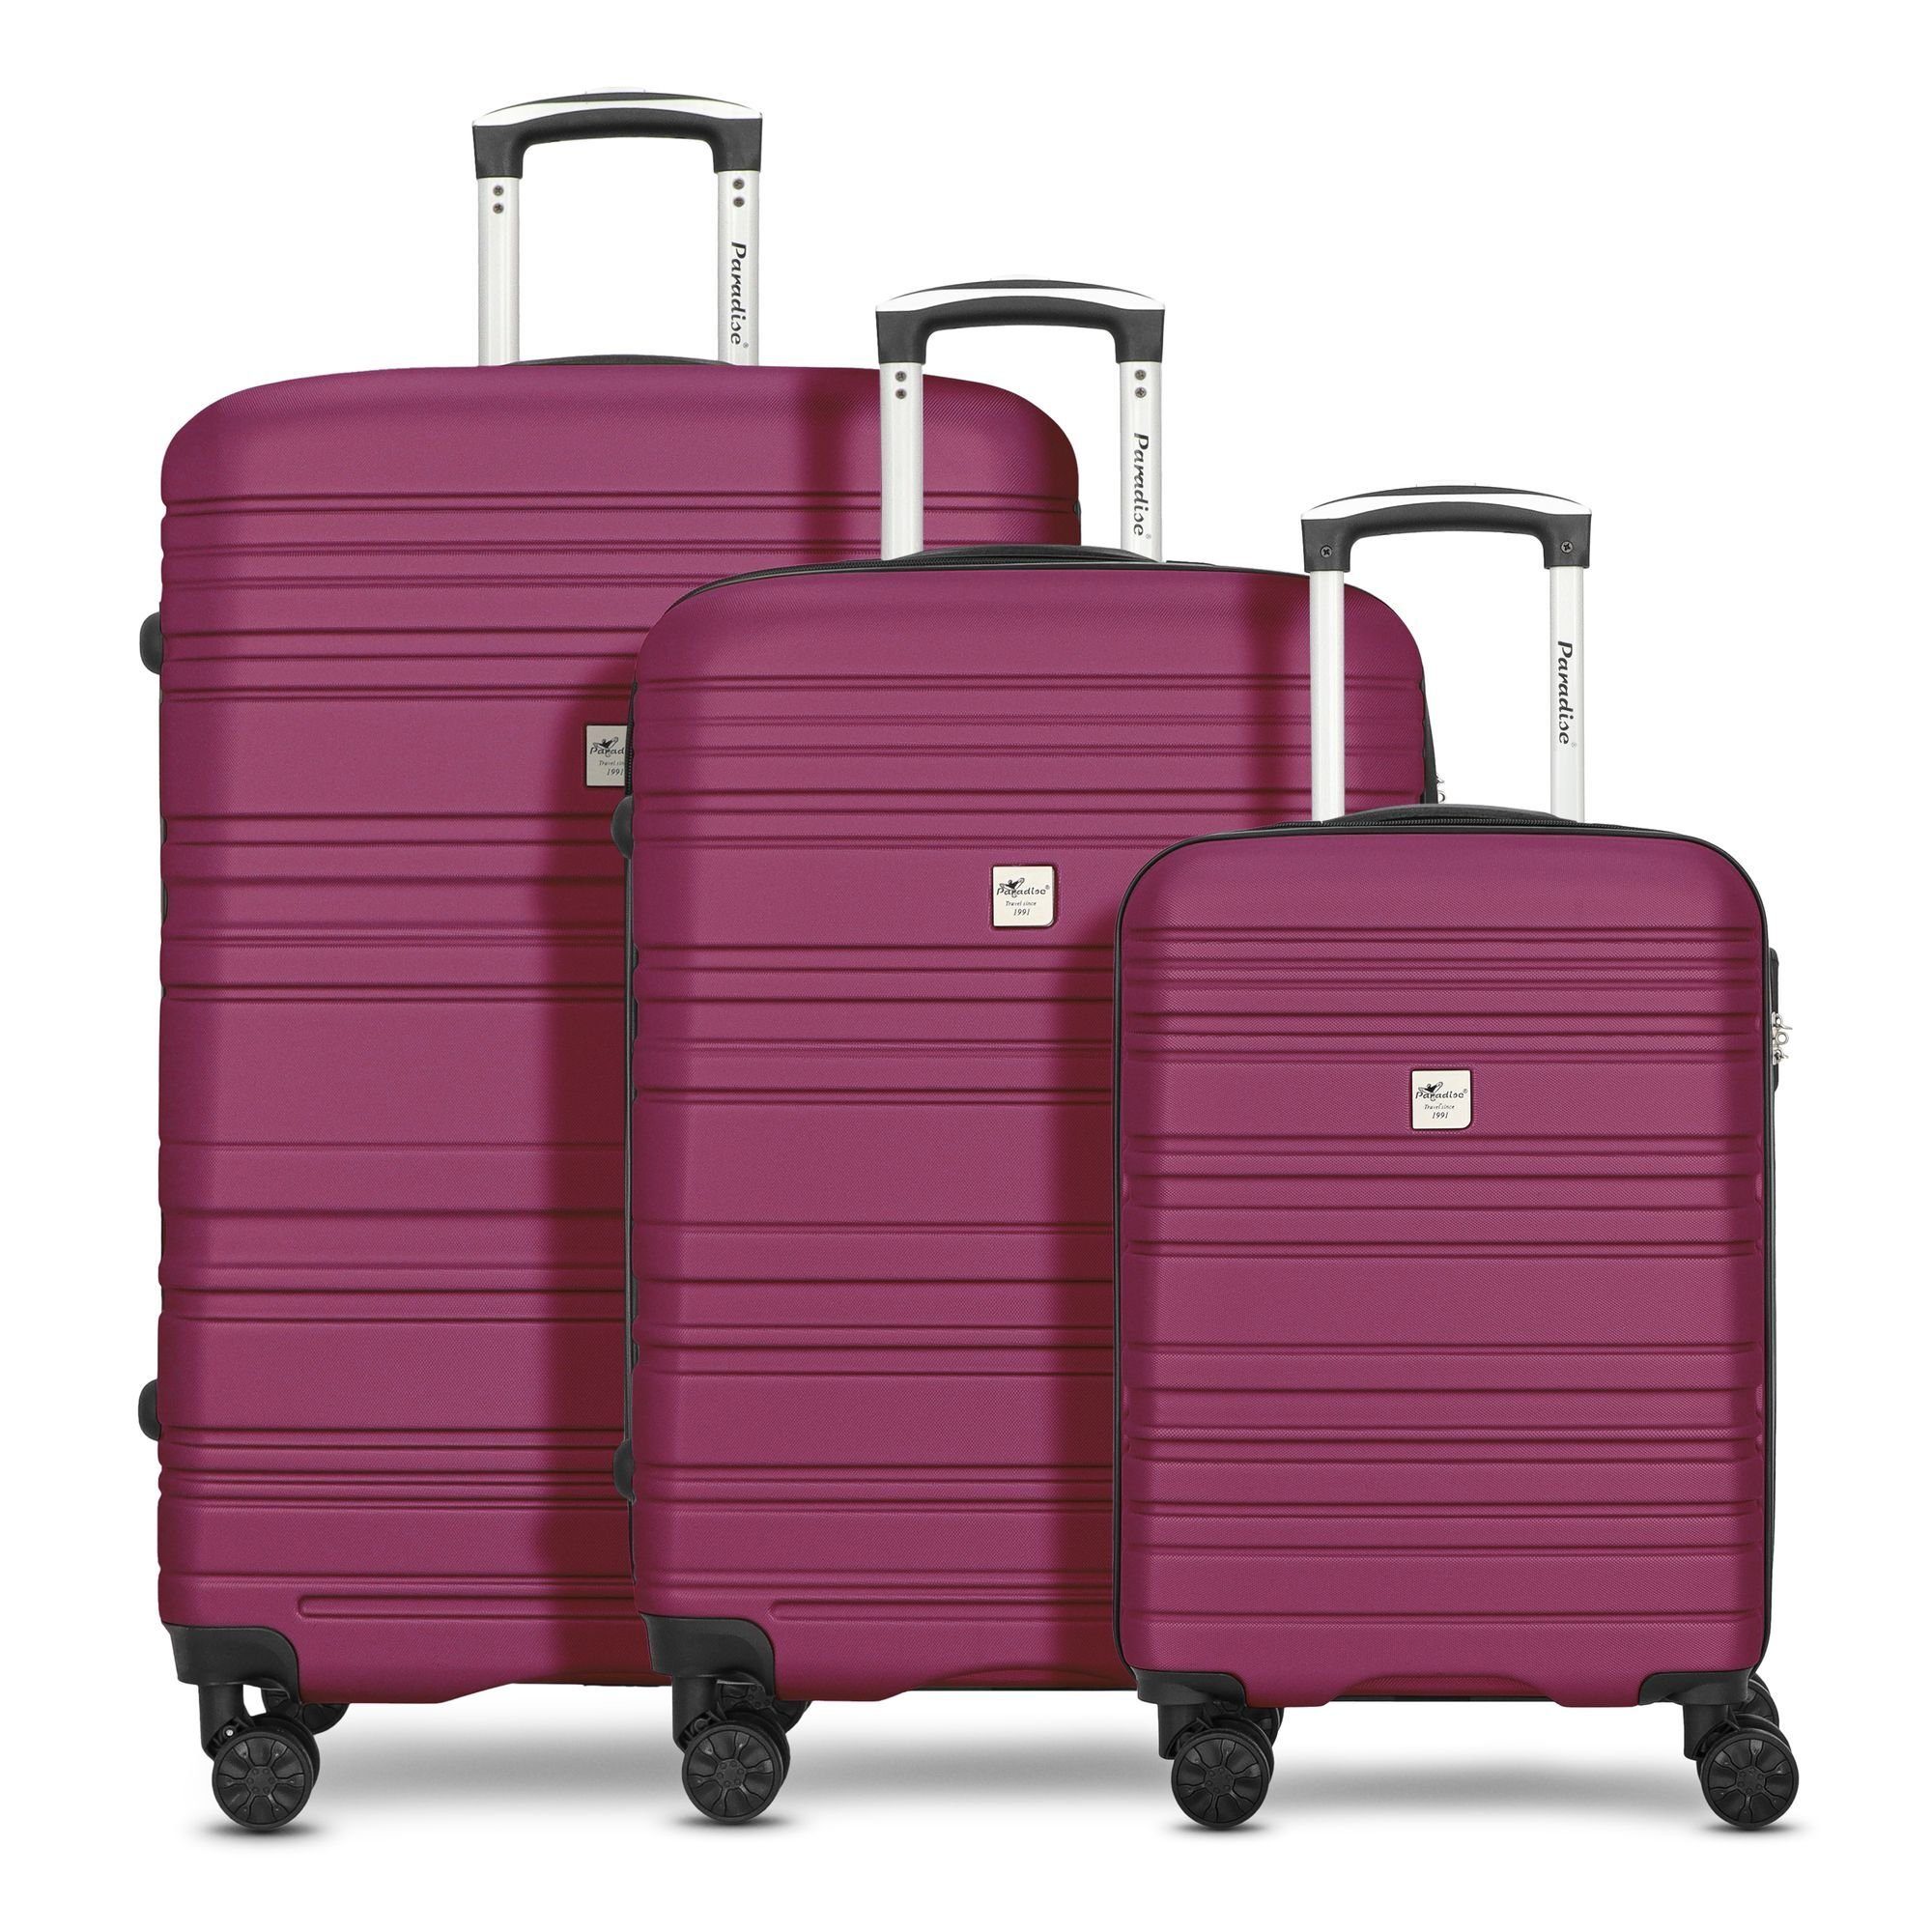 CHECK.IN® Trolleyset Paradise, 4 Rollen, (3-teilig, 3 tlg), ABS berry